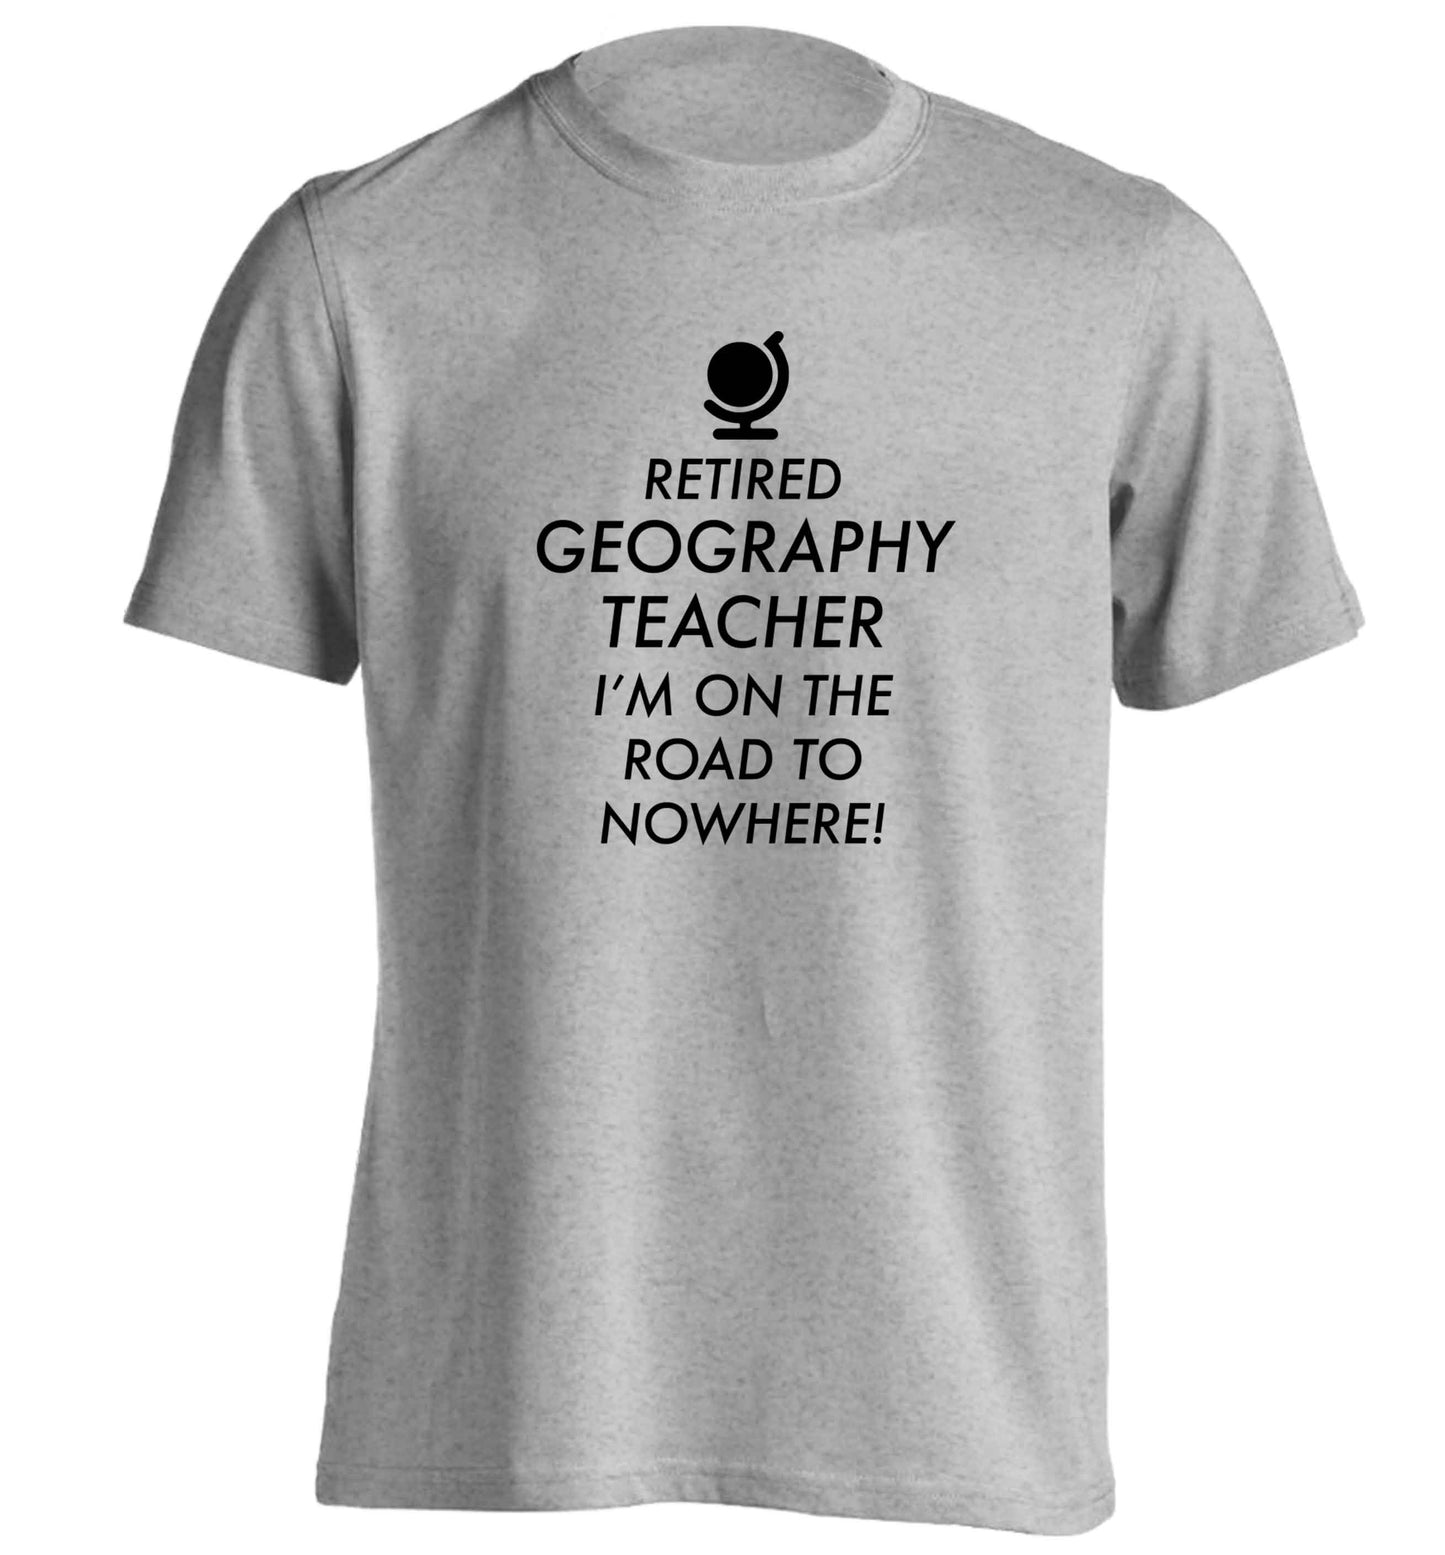 Retired geography teacher I'm on the road to nowhere adults unisex grey Tshirt 2XL